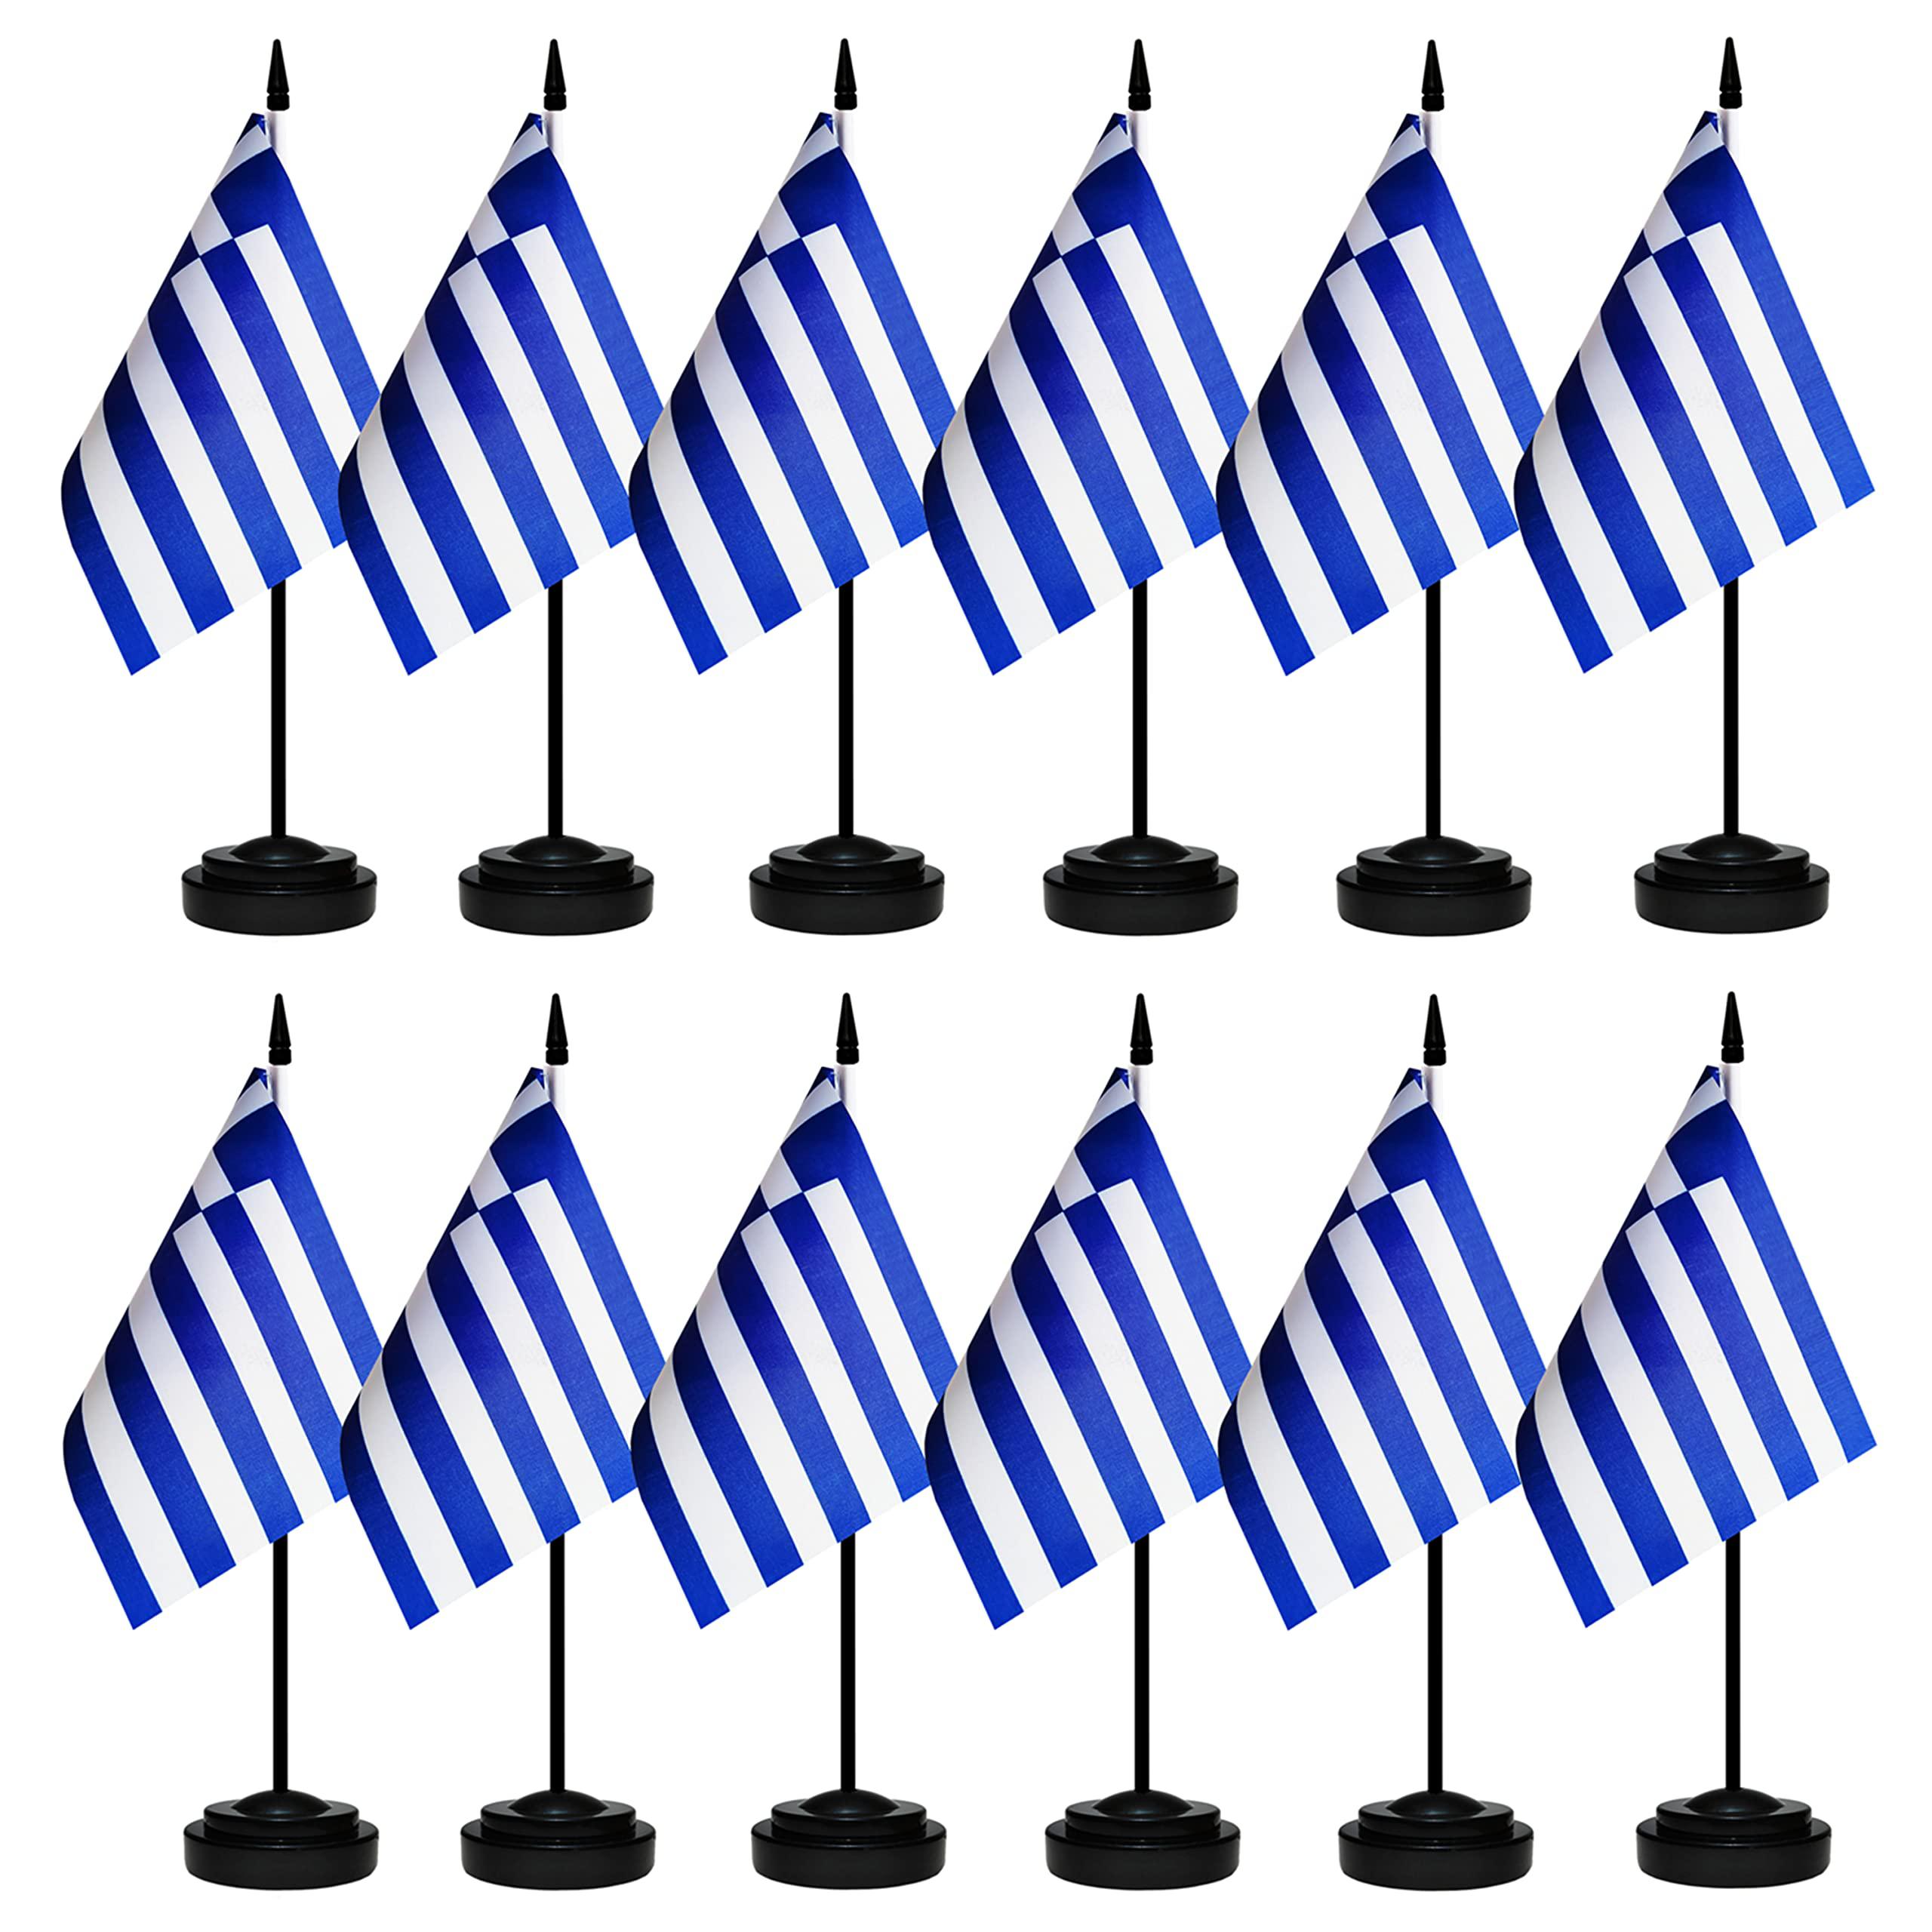 BCLin 12 pack greece desk flags set, greek small mini table office flags with 12" solid black pole, black base and spear top, minia